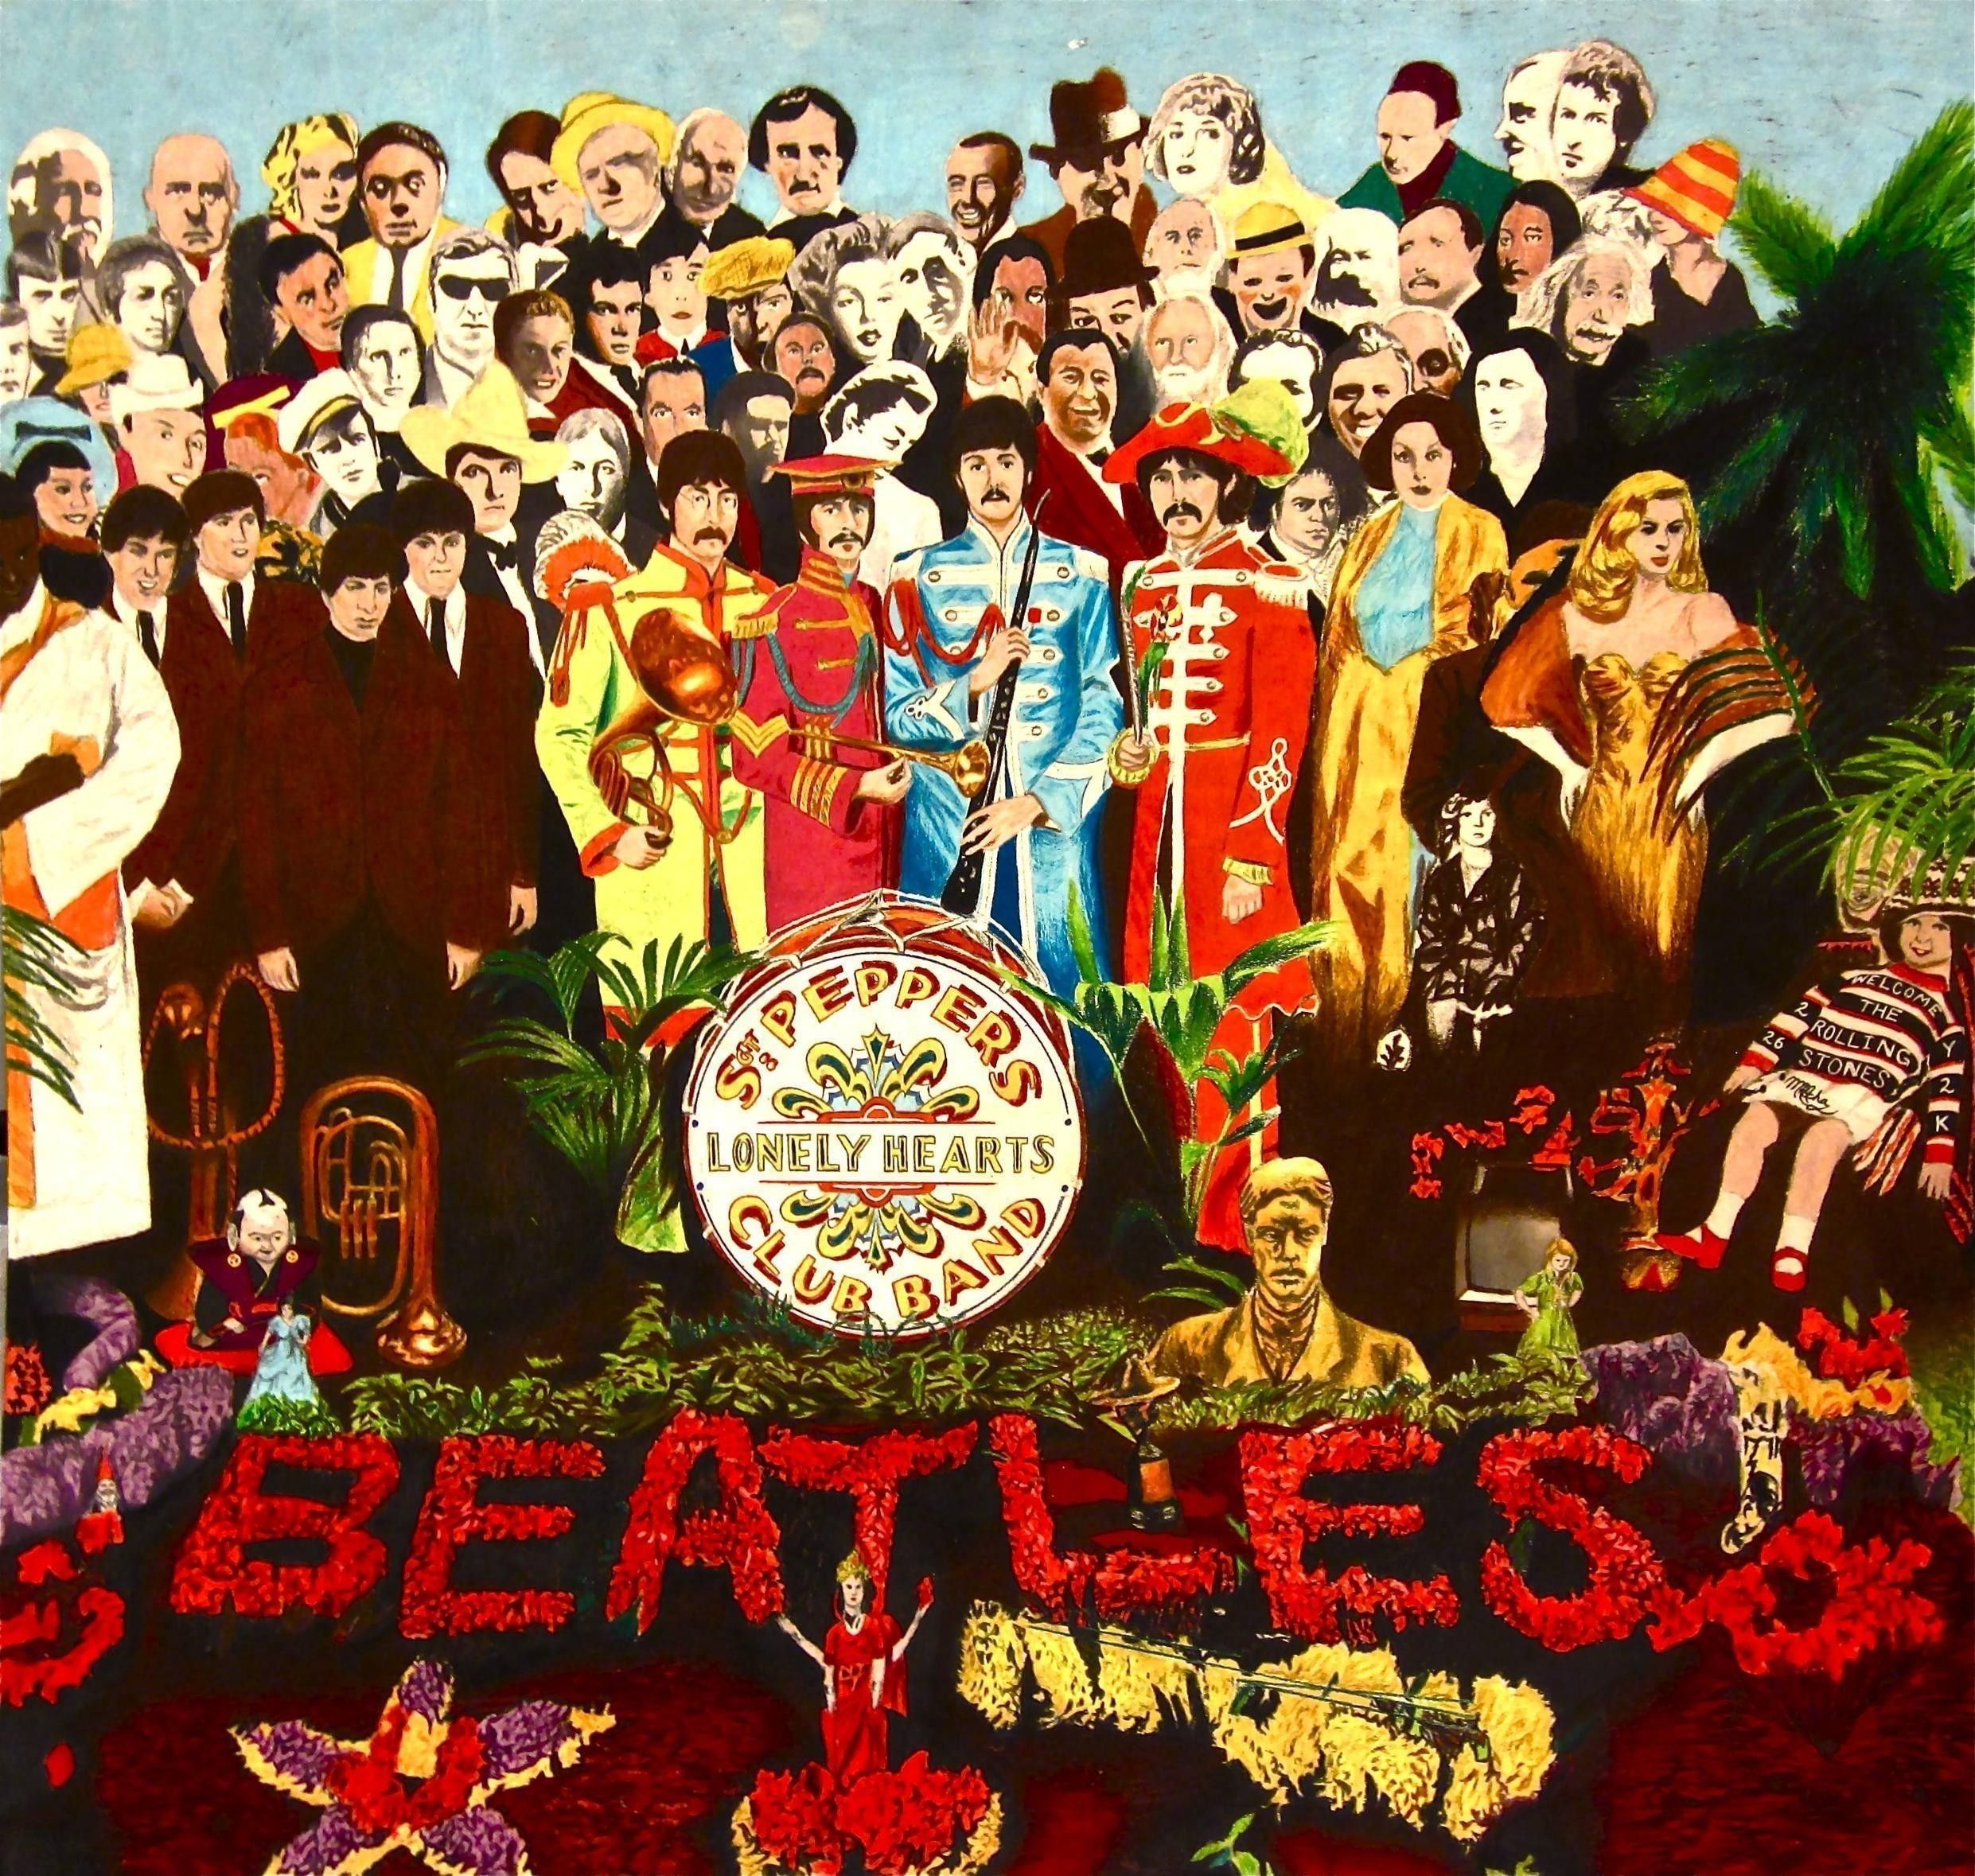 The Beatles Sergeant Peppers Lonely Hearts Club Band Album Cover